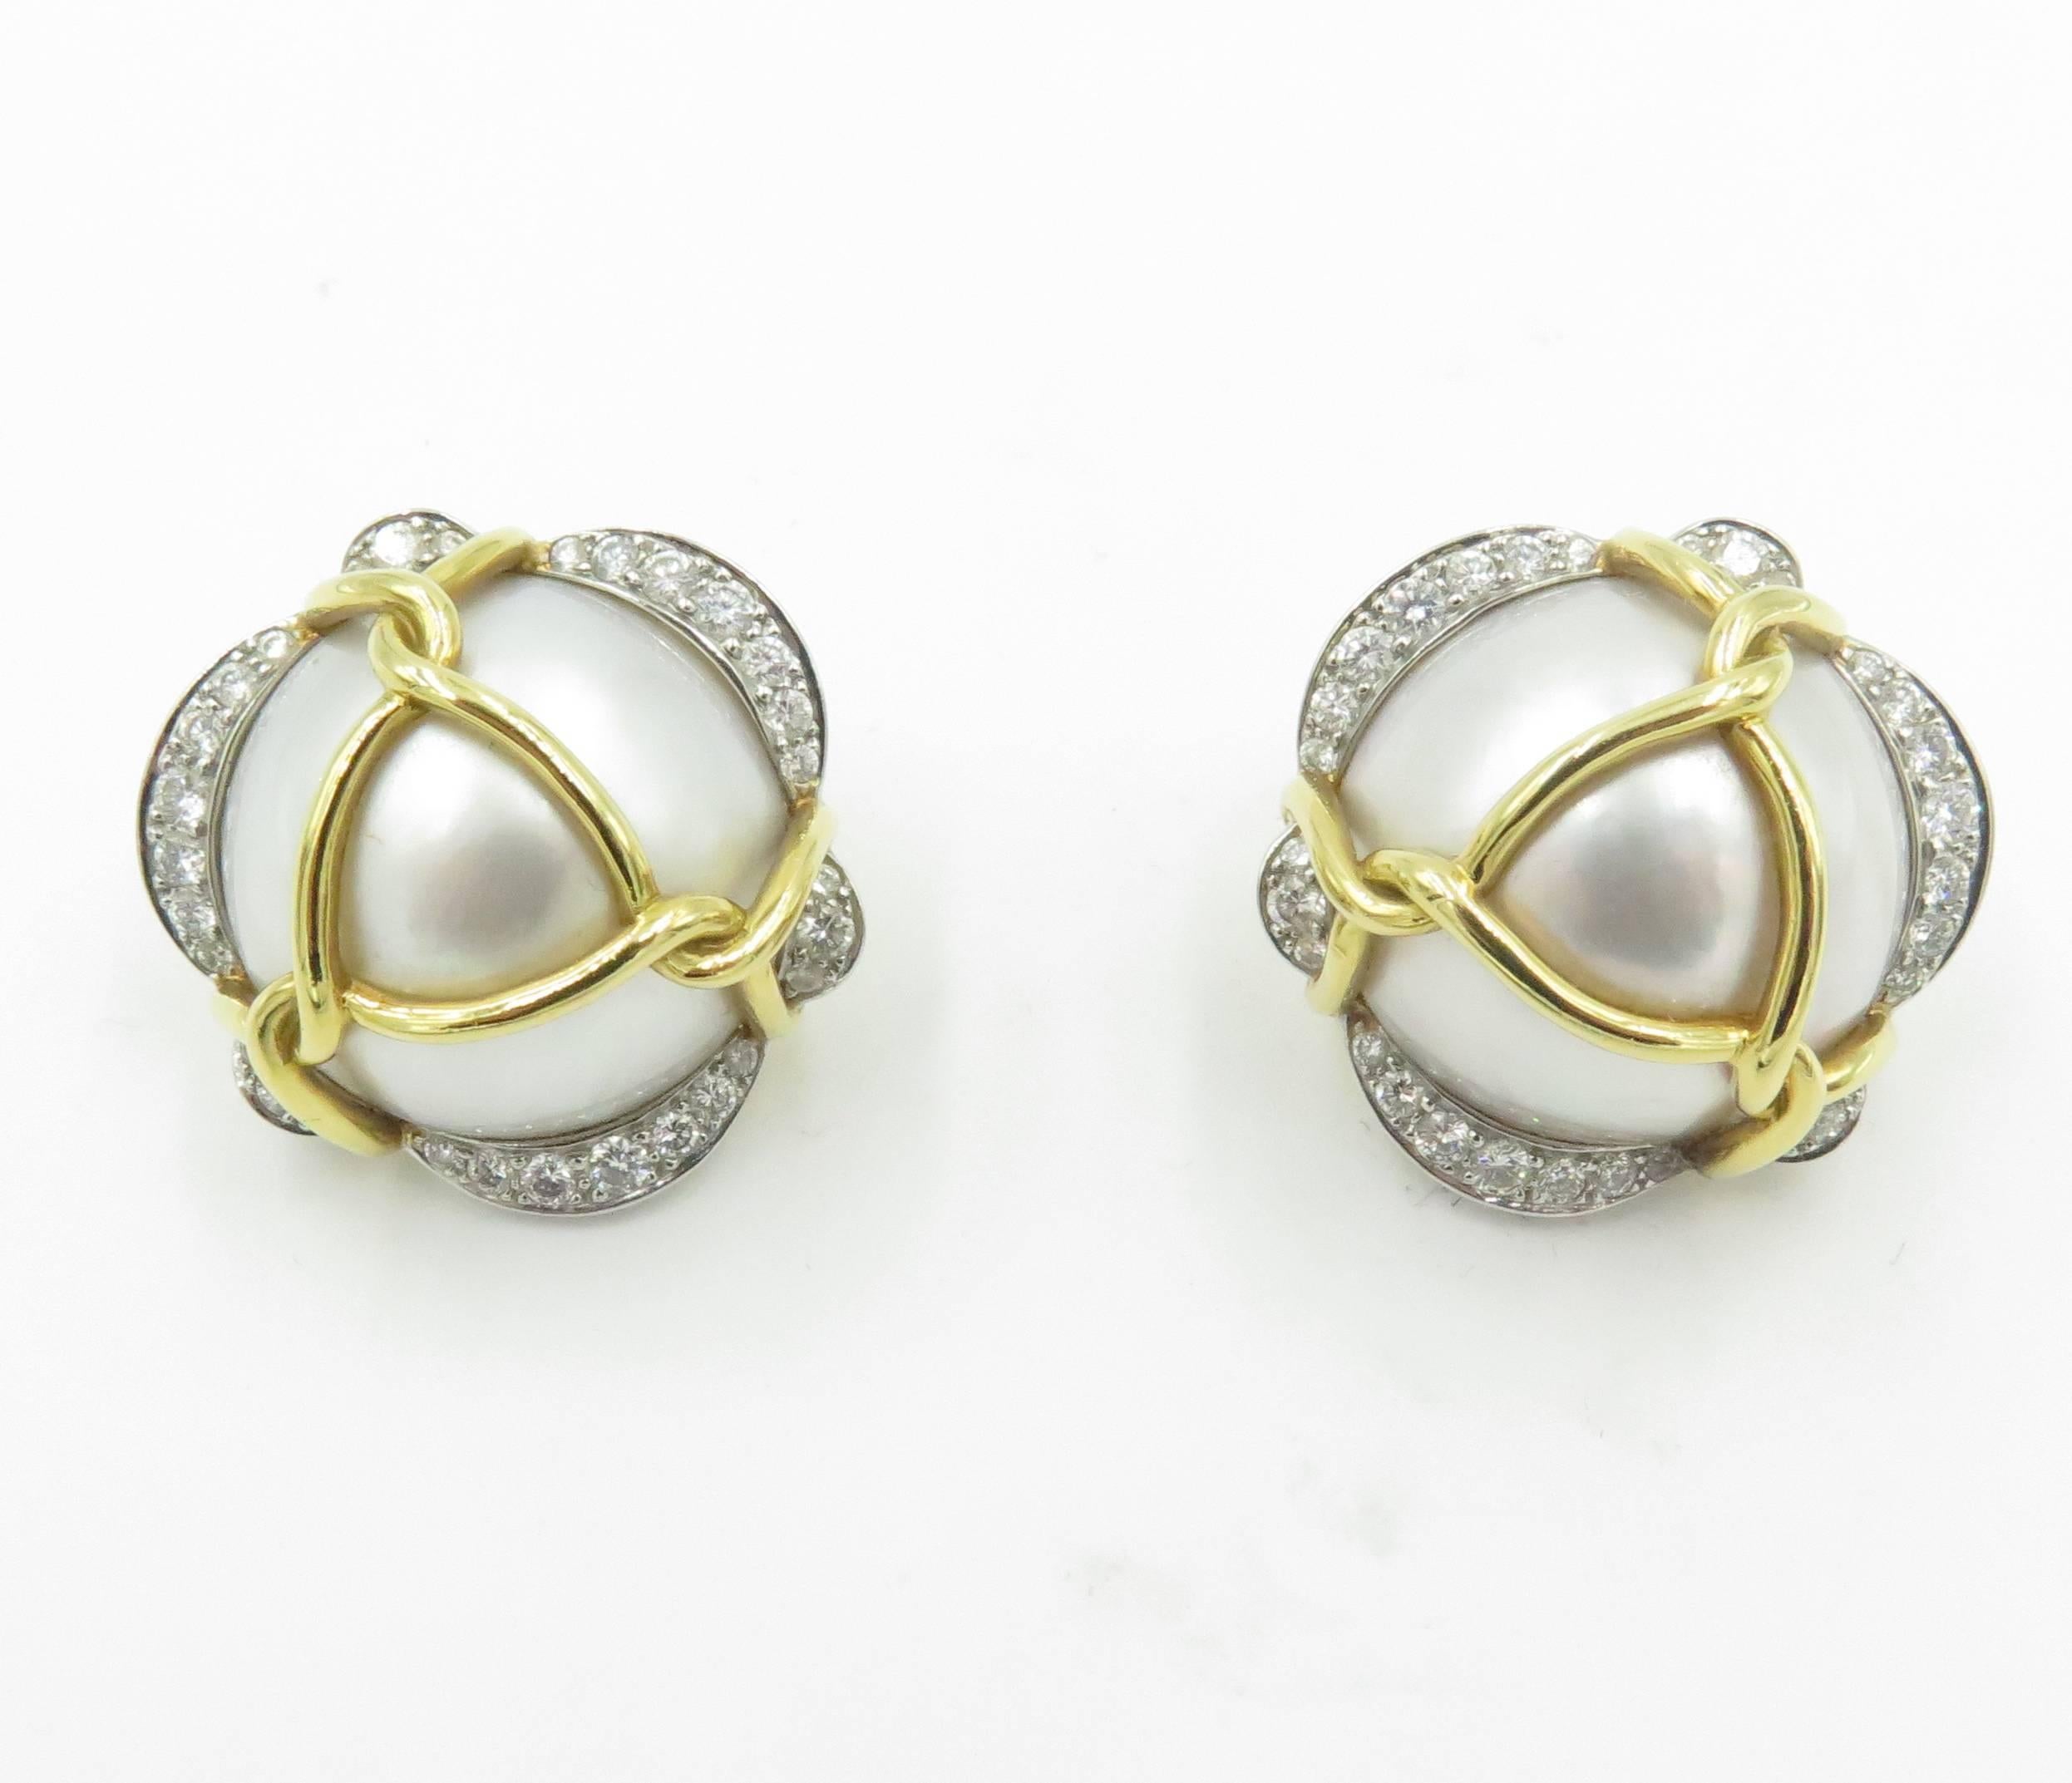 A pair of 18 karat yellow gold, mabe pearl and platinum set diamond earrings.  Verdura.  The earclips center a 17mm white mabé pearl, edged with undulating bands of diamonds set in platinum, and wrapped with polished yellow gold rope. An original